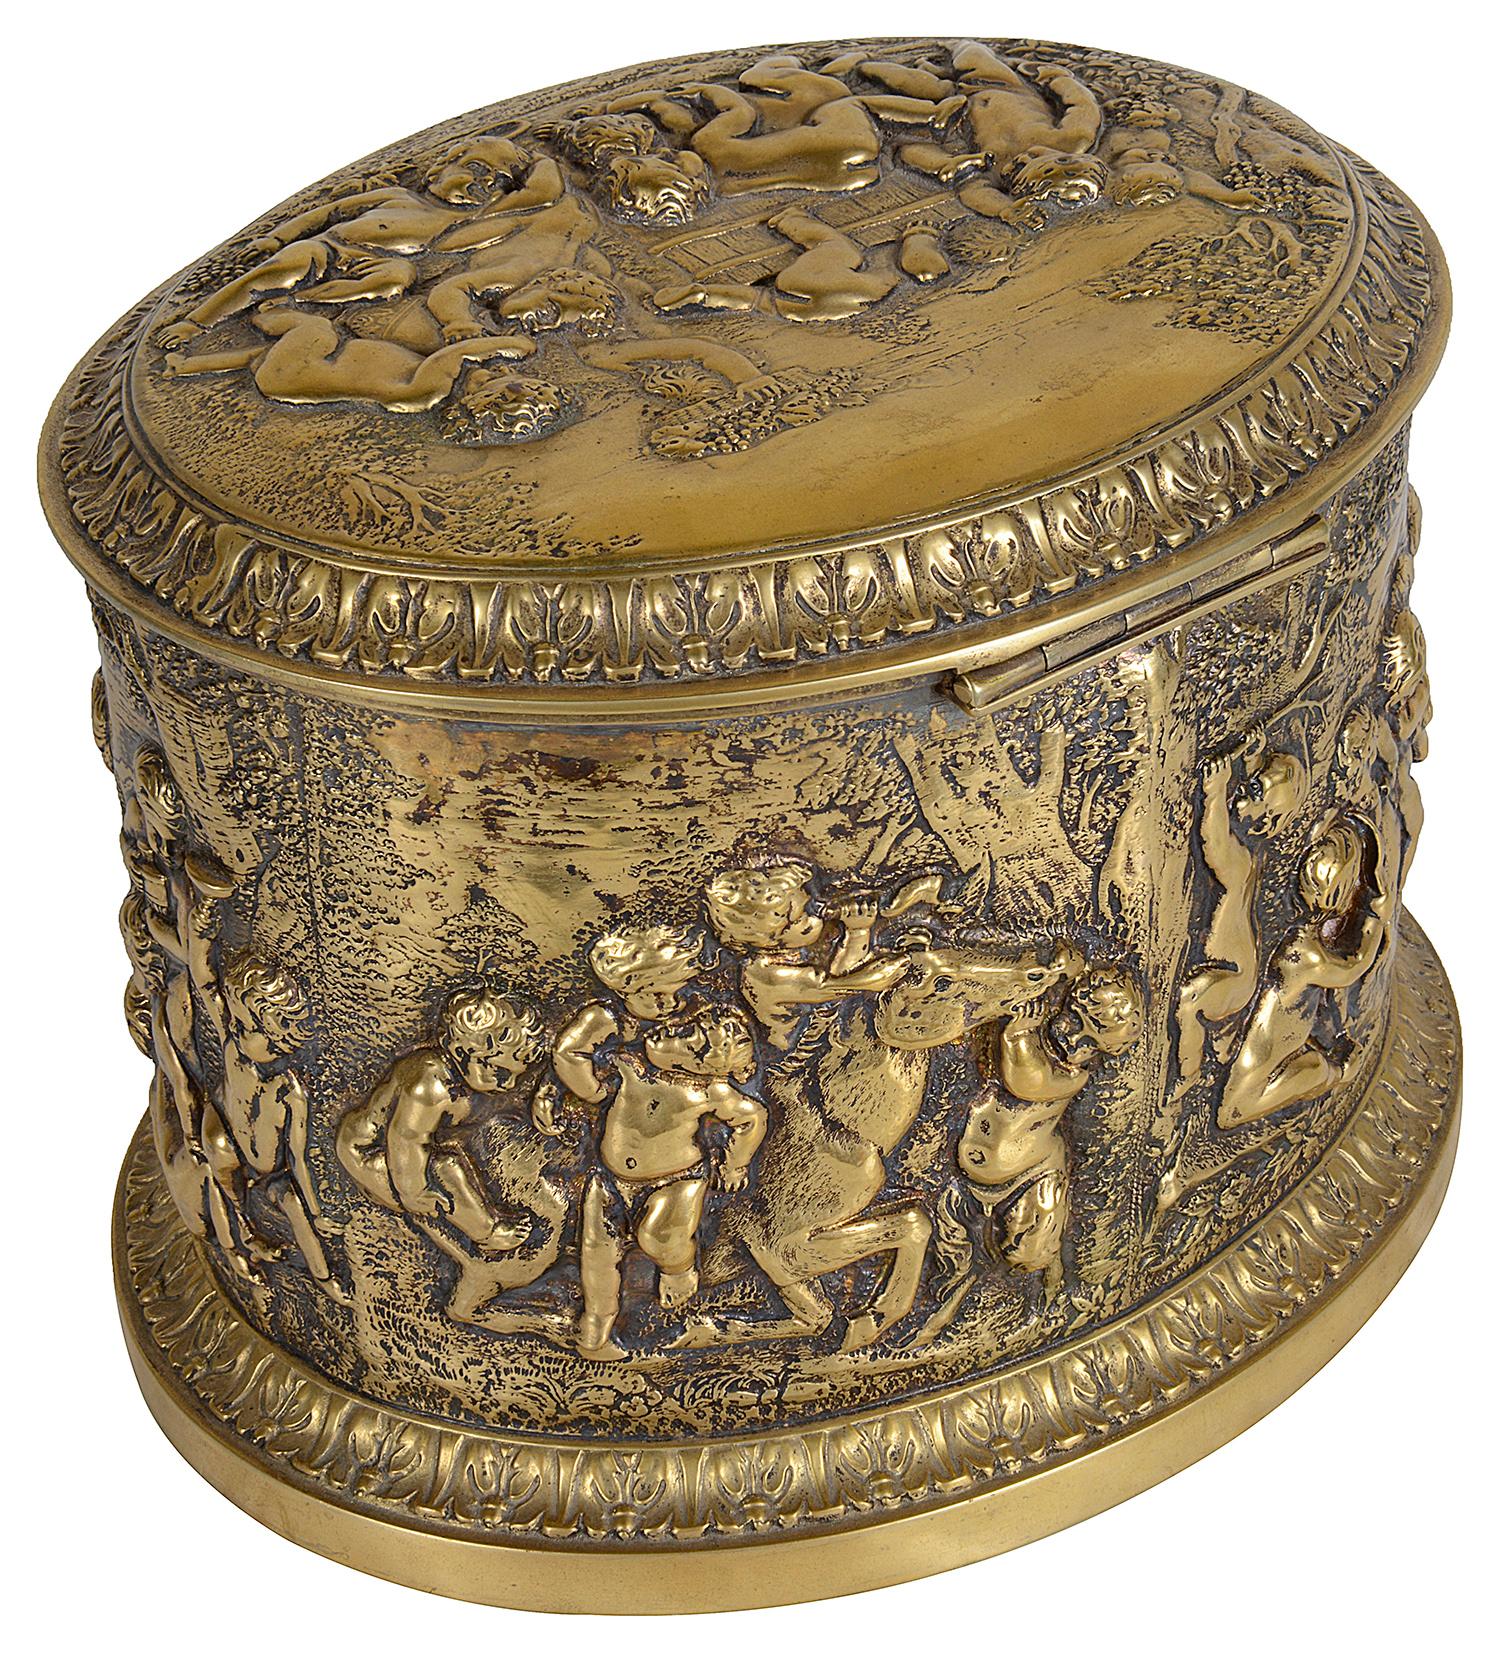 Classical Greek Classical 19th Century Gilded Ormolu Embossed Tea Caddy For Sale